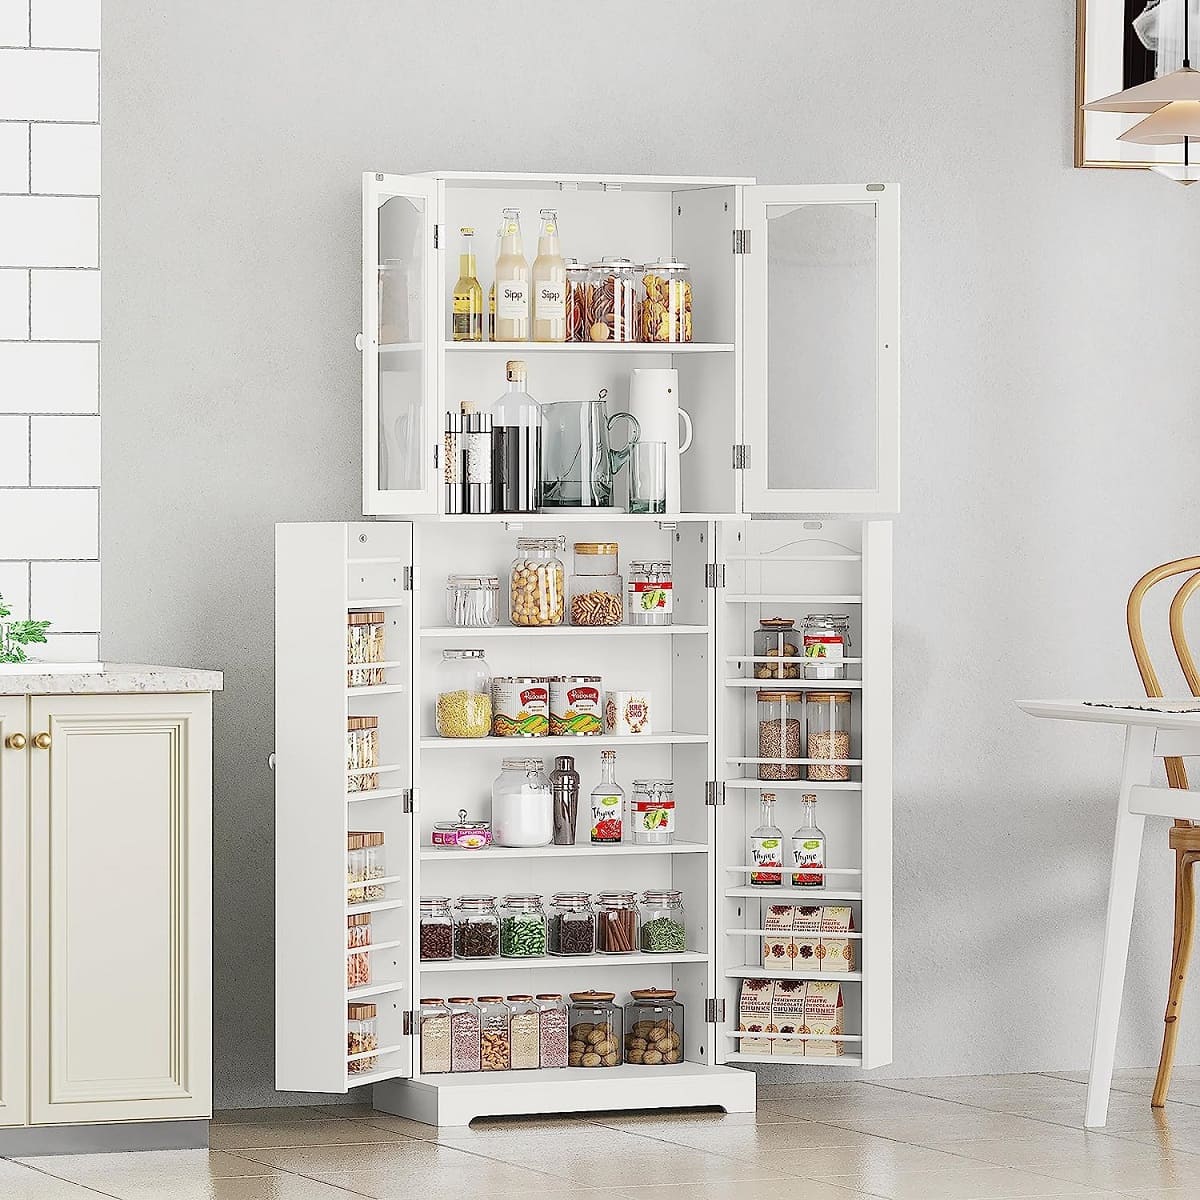 How To Build A Freestanding Food Pantry Cabinet | Storables